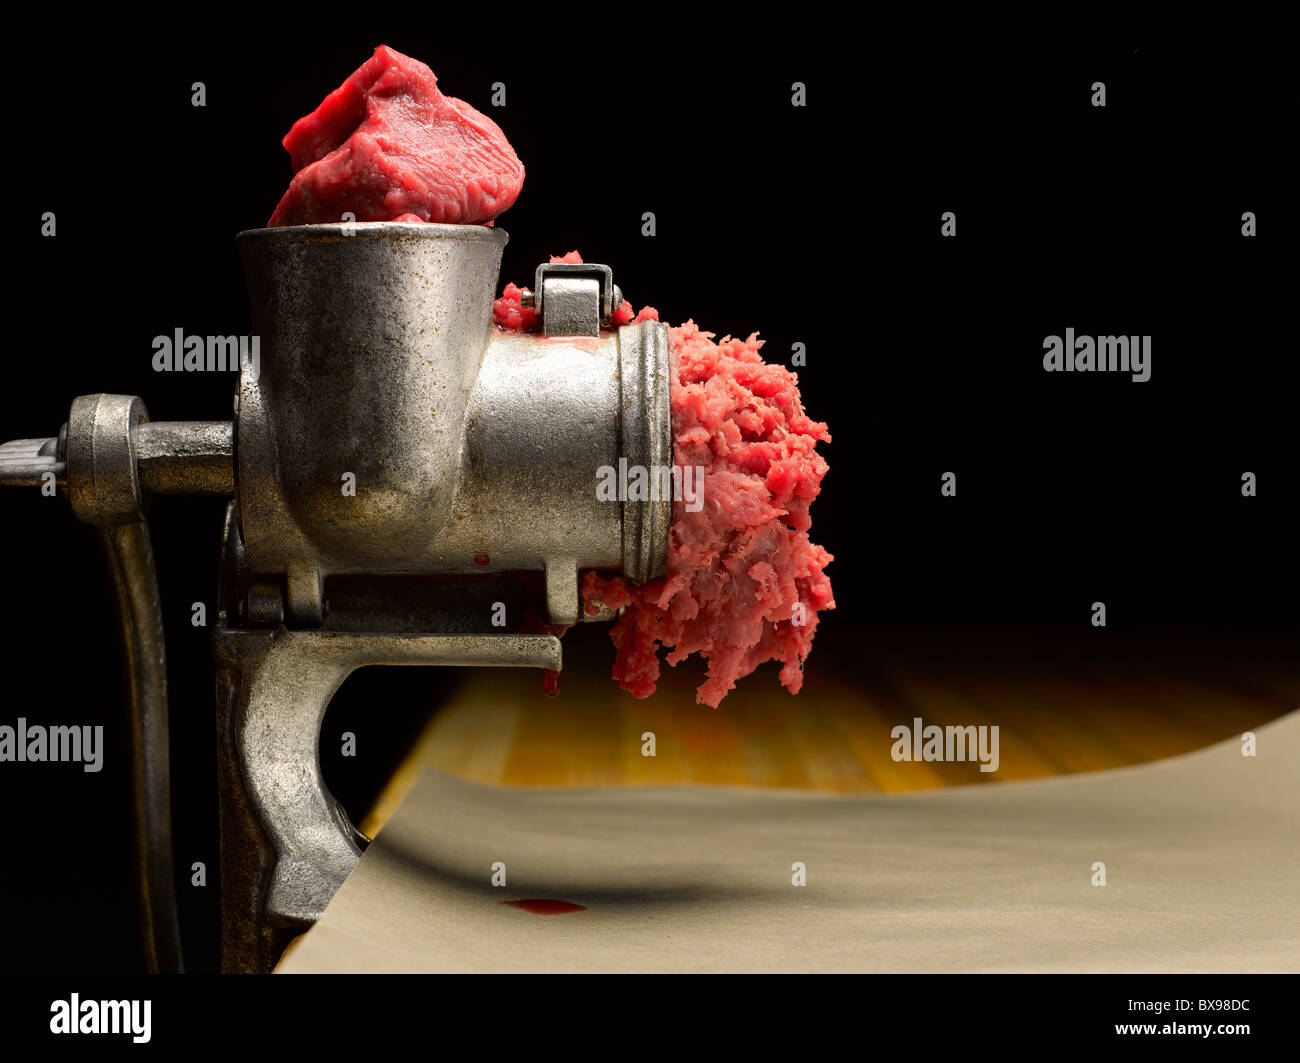 Freshly ground meat coming out of a meat grinder - Stock Image - F017/6580  - Science Photo Library